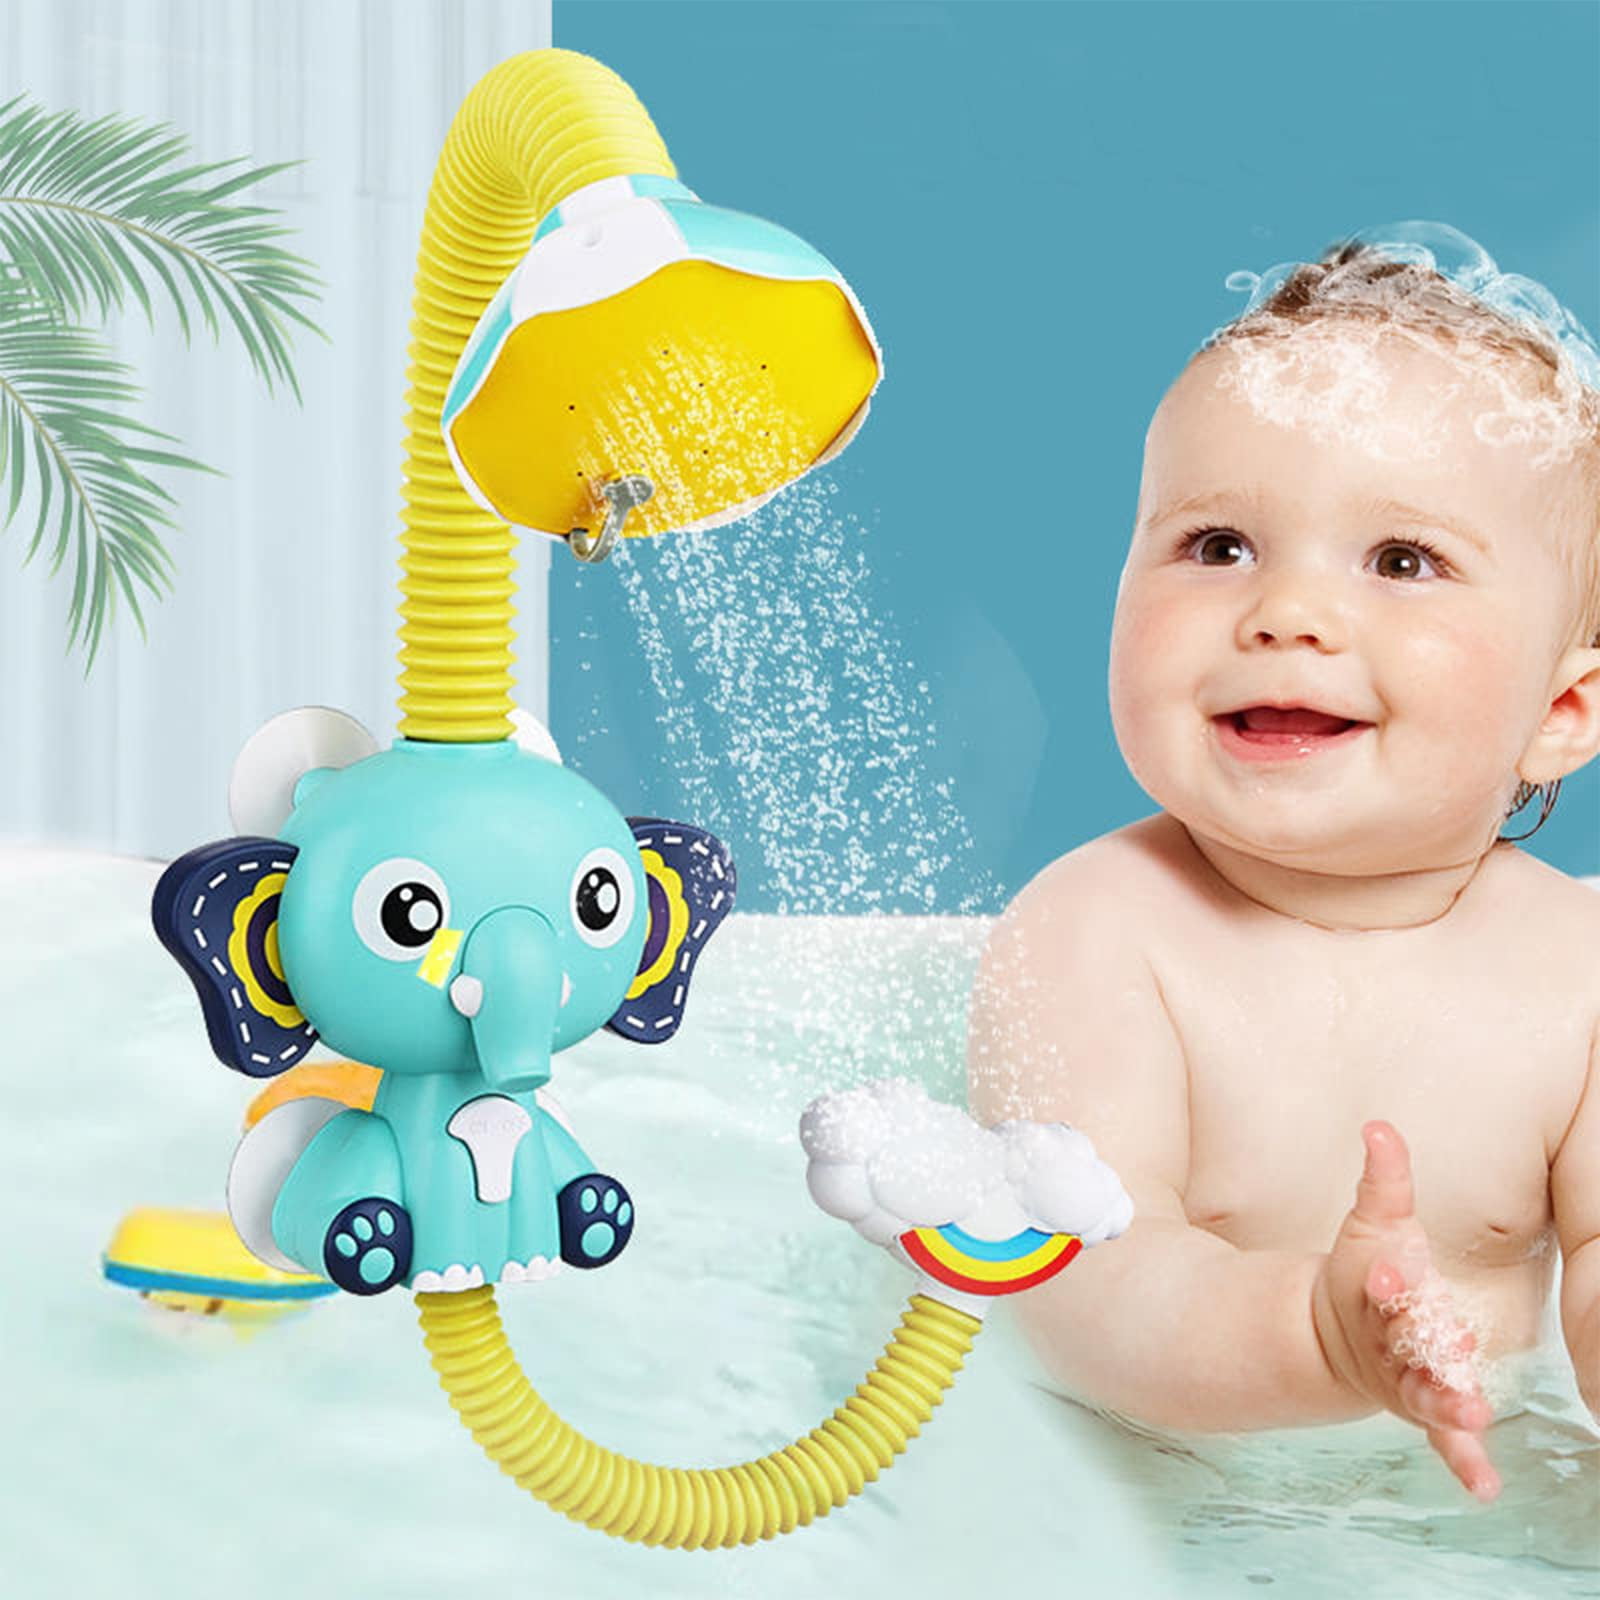 Koala Bath Shower Toy For Kids Battery Operated Water Squirt Shower Faucet  Bathtub Water Pump Sprinkler Shower Pool Bathroom Toy For Baby Toddler Infa